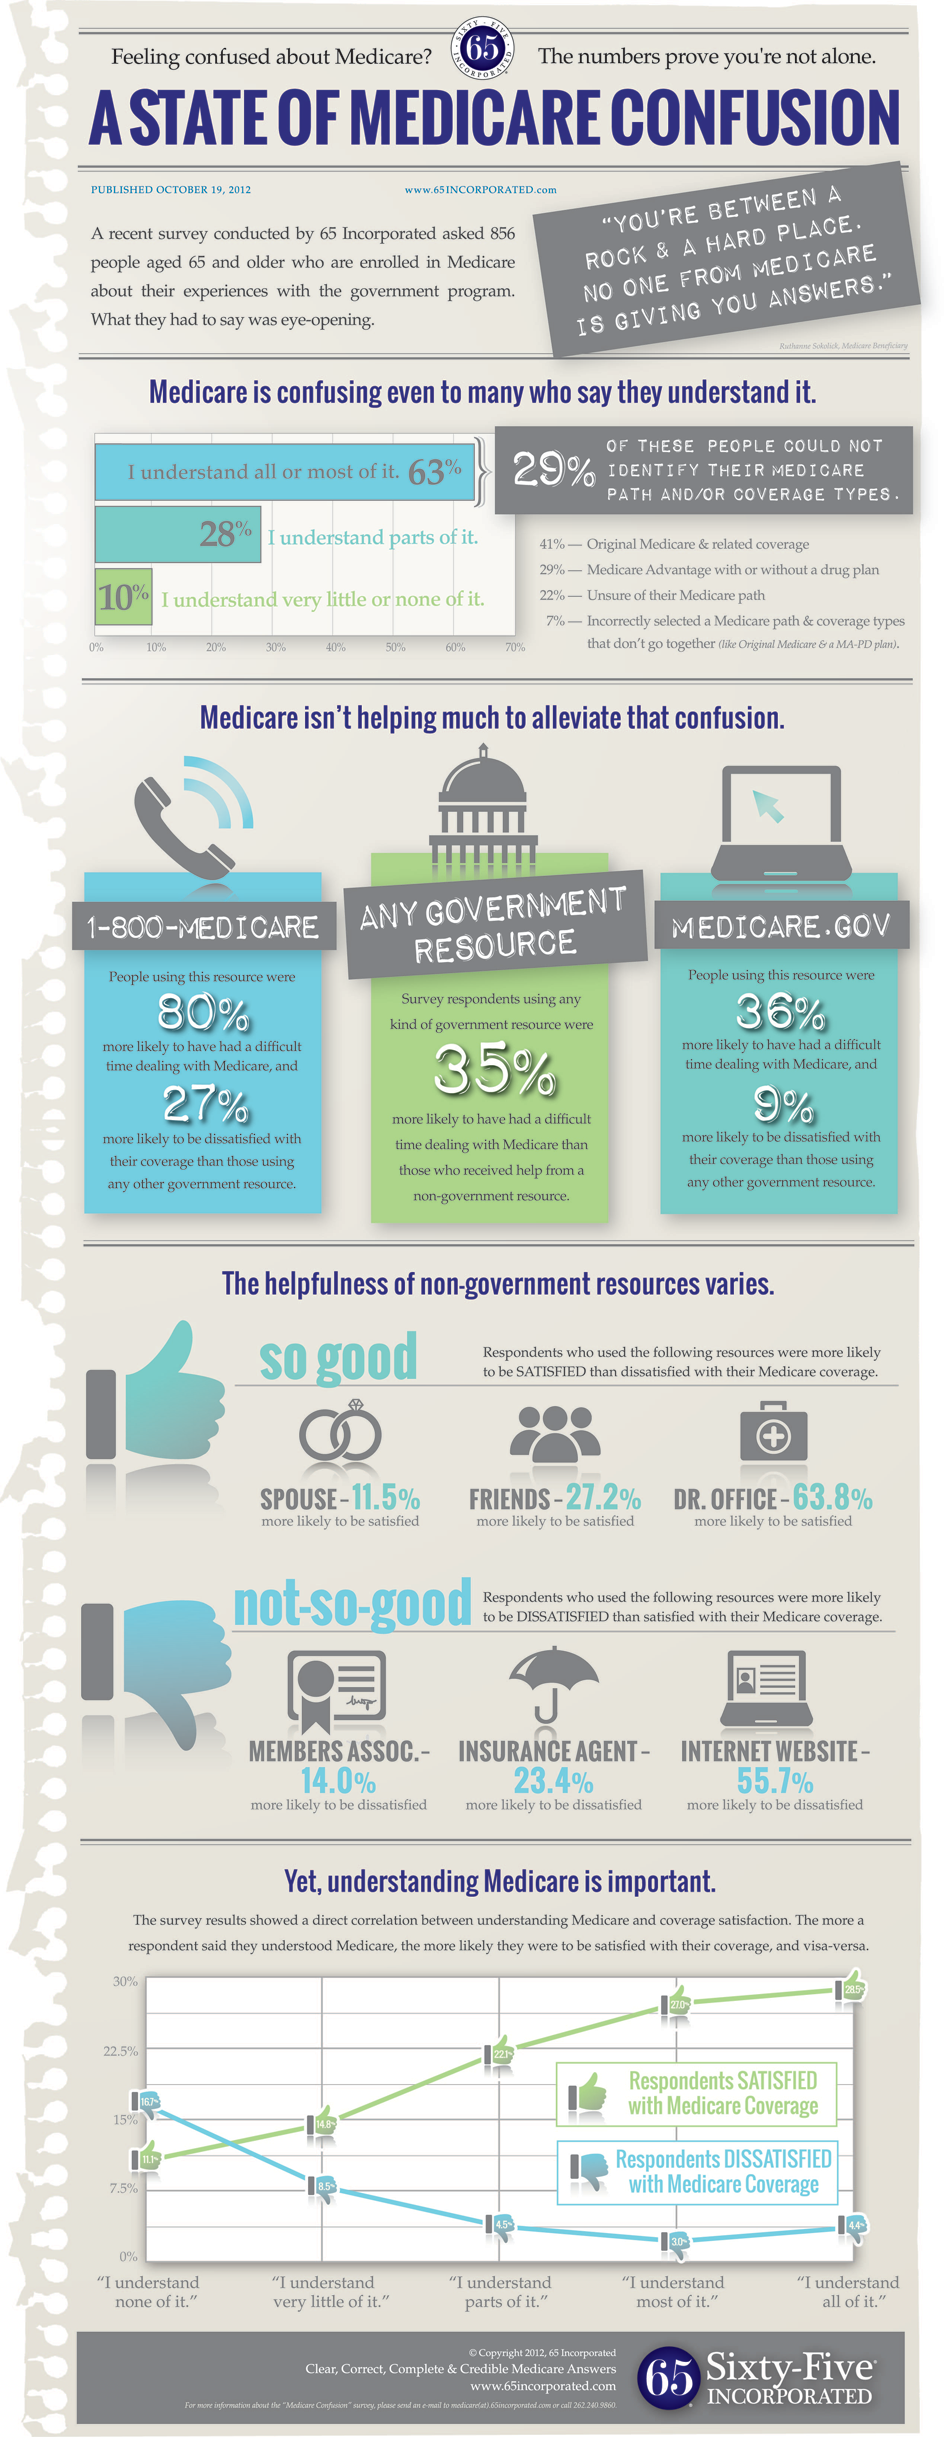 "A STATE OF MEDICARE CONFUSION" - An Infographic by 65 Incorporated